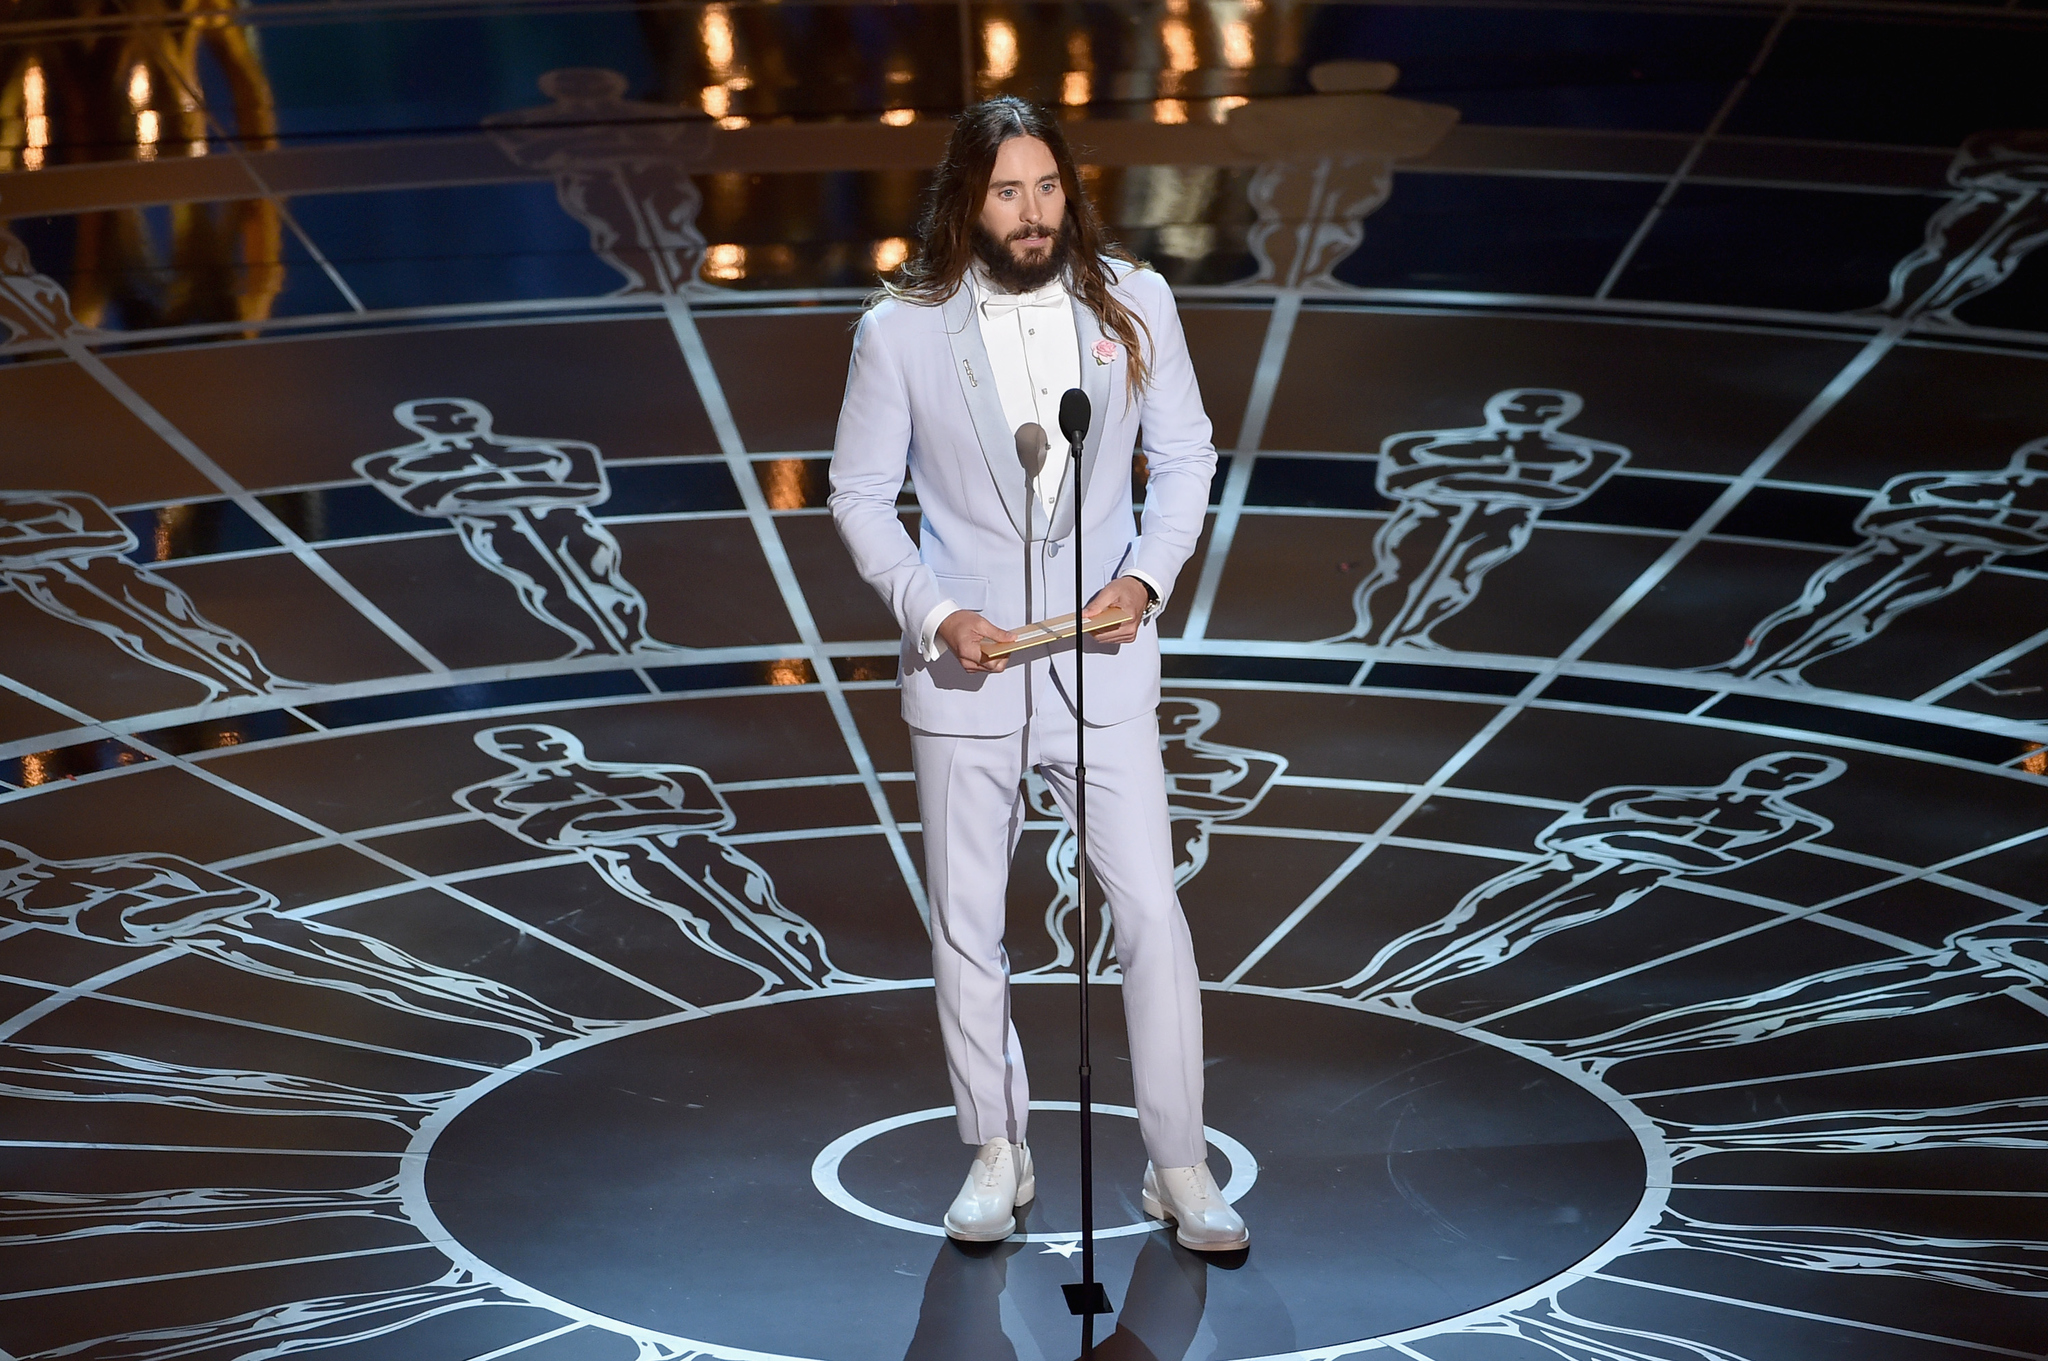 Jared Leto at event of The Oscars (2015)